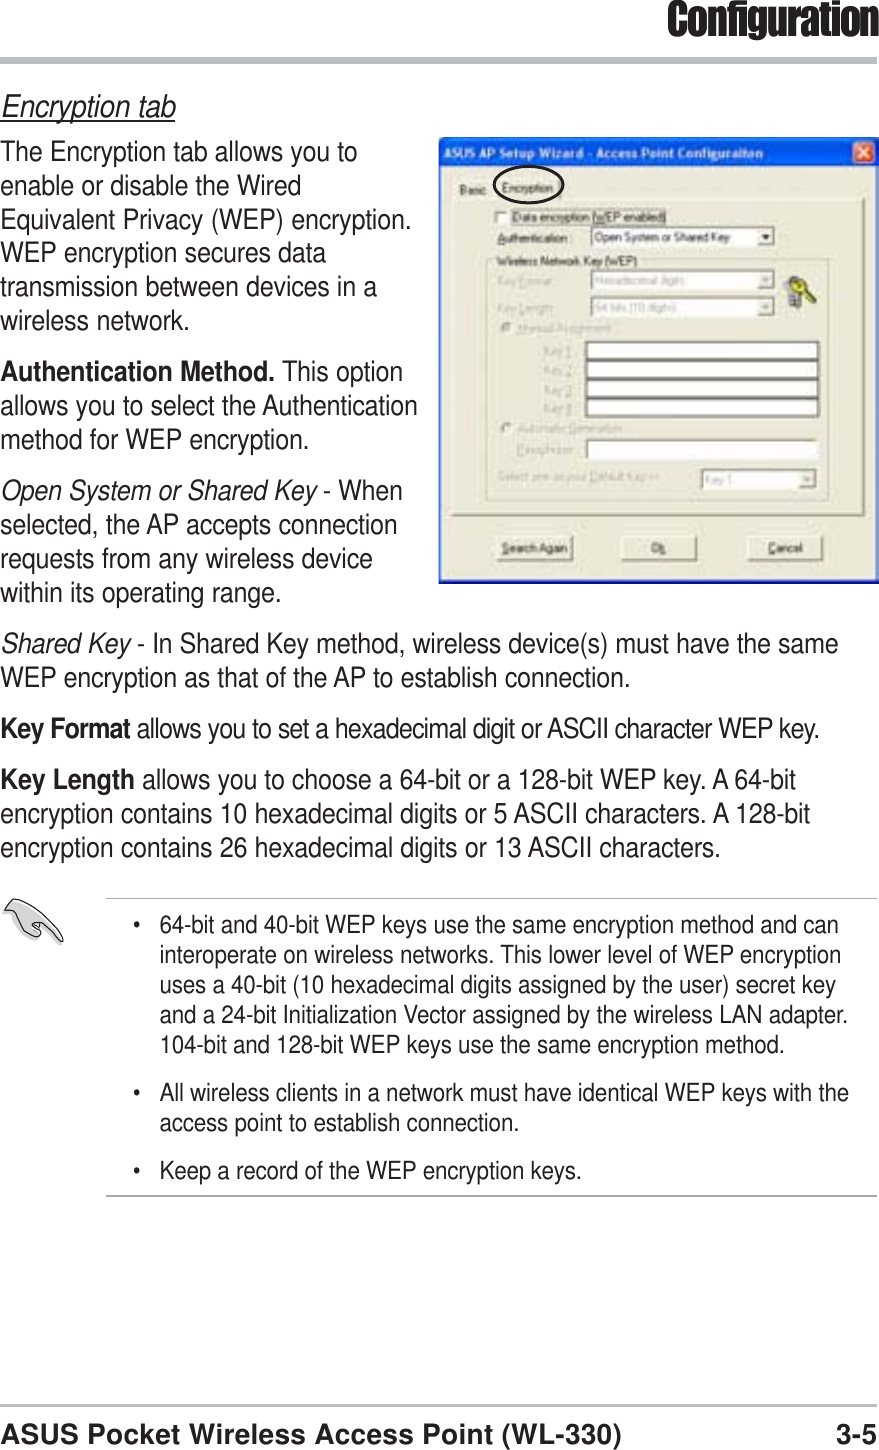 3-5ASUS Pocket Wireless Access Point (WL-330)ConfigurationEncryption tabThe Encryption tab allows you toenable or disable the WiredEquivalent Privacy (WEP) encryption.WEP encryption secures datatransmission between devices in awireless network.Authentication Method. This optionallows you to select the Authenticationmethod for WEP encryption.Open System or Shared Key - Whenselected, the AP accepts connectionrequests from any wireless devicewithin its operating range.Shared Key - In Shared Key method, wireless device(s) must have the sameWEP encryption as that of the AP to establish connection.Key Format allows you to set a hexadecimal digit or ASCII character WEP key.Key Length allows you to choose a 64-bit or a 128-bit WEP key. A 64-bitencryption contains 10 hexadecimal digits or 5 ASCII characters. A 128-bitencryption contains 26 hexadecimal digits or 13 ASCII characters.• 64-bit and 40-bit WEP keys use the same encryption method and caninteroperate on wireless networks. This lower level of WEP encryptionuses a 40-bit (10 hexadecimal digits assigned by the user) secret keyand a 24-bit Initialization Vector assigned by the wireless LAN adapter.104-bit and 128-bit WEP keys use the same encryption method.• All wireless clients in a network must have identical WEP keys with theaccess point to establish connection.• Keep a record of the WEP encryption keys.